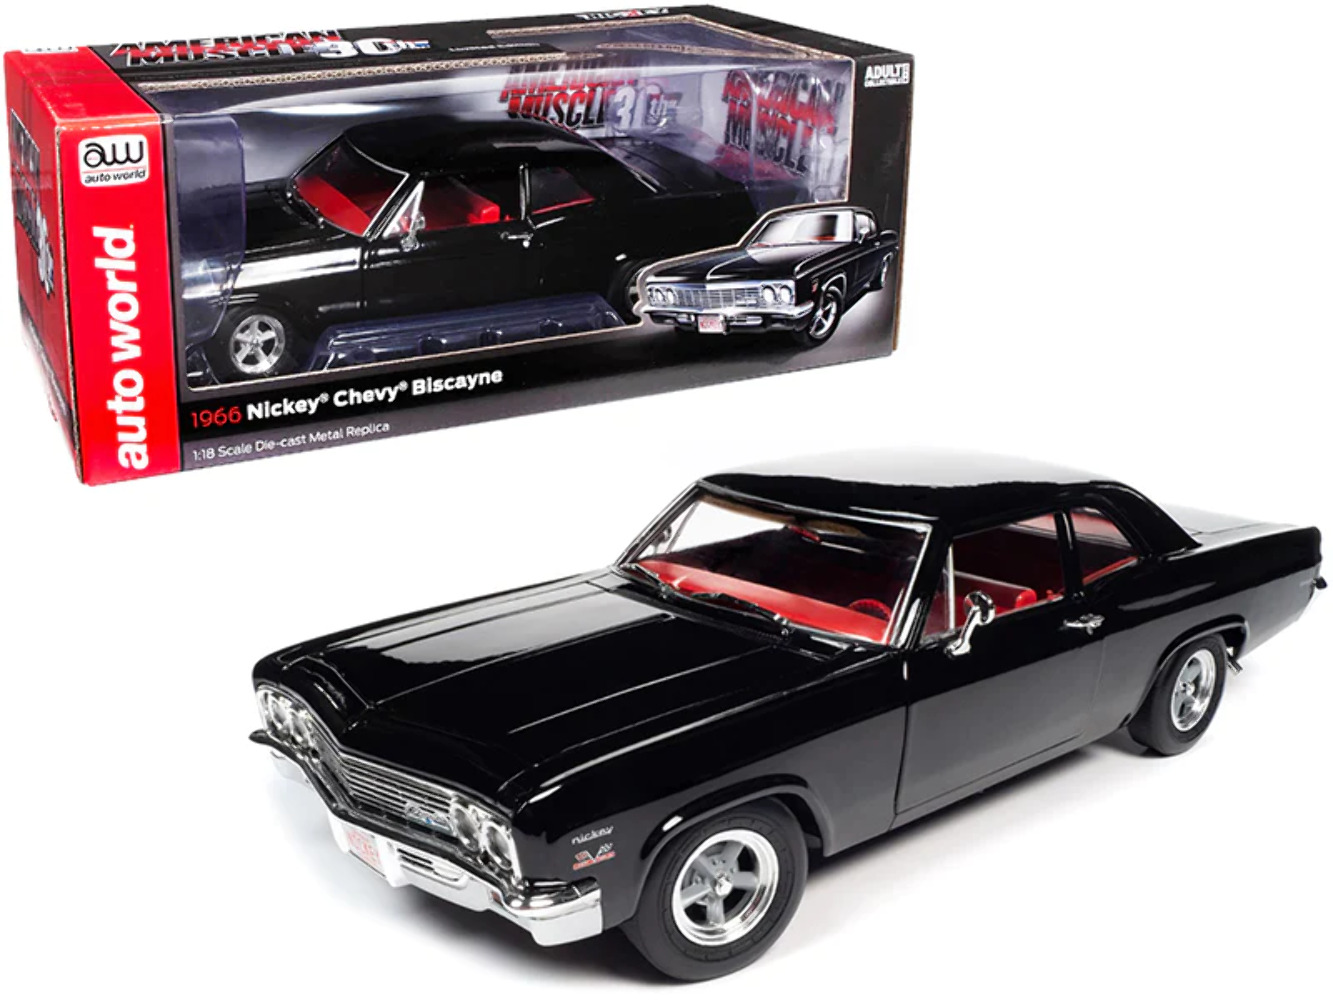 1966 Chevrolet Biscayne Nickey Coupe Tuxedo Black with Red Interior \